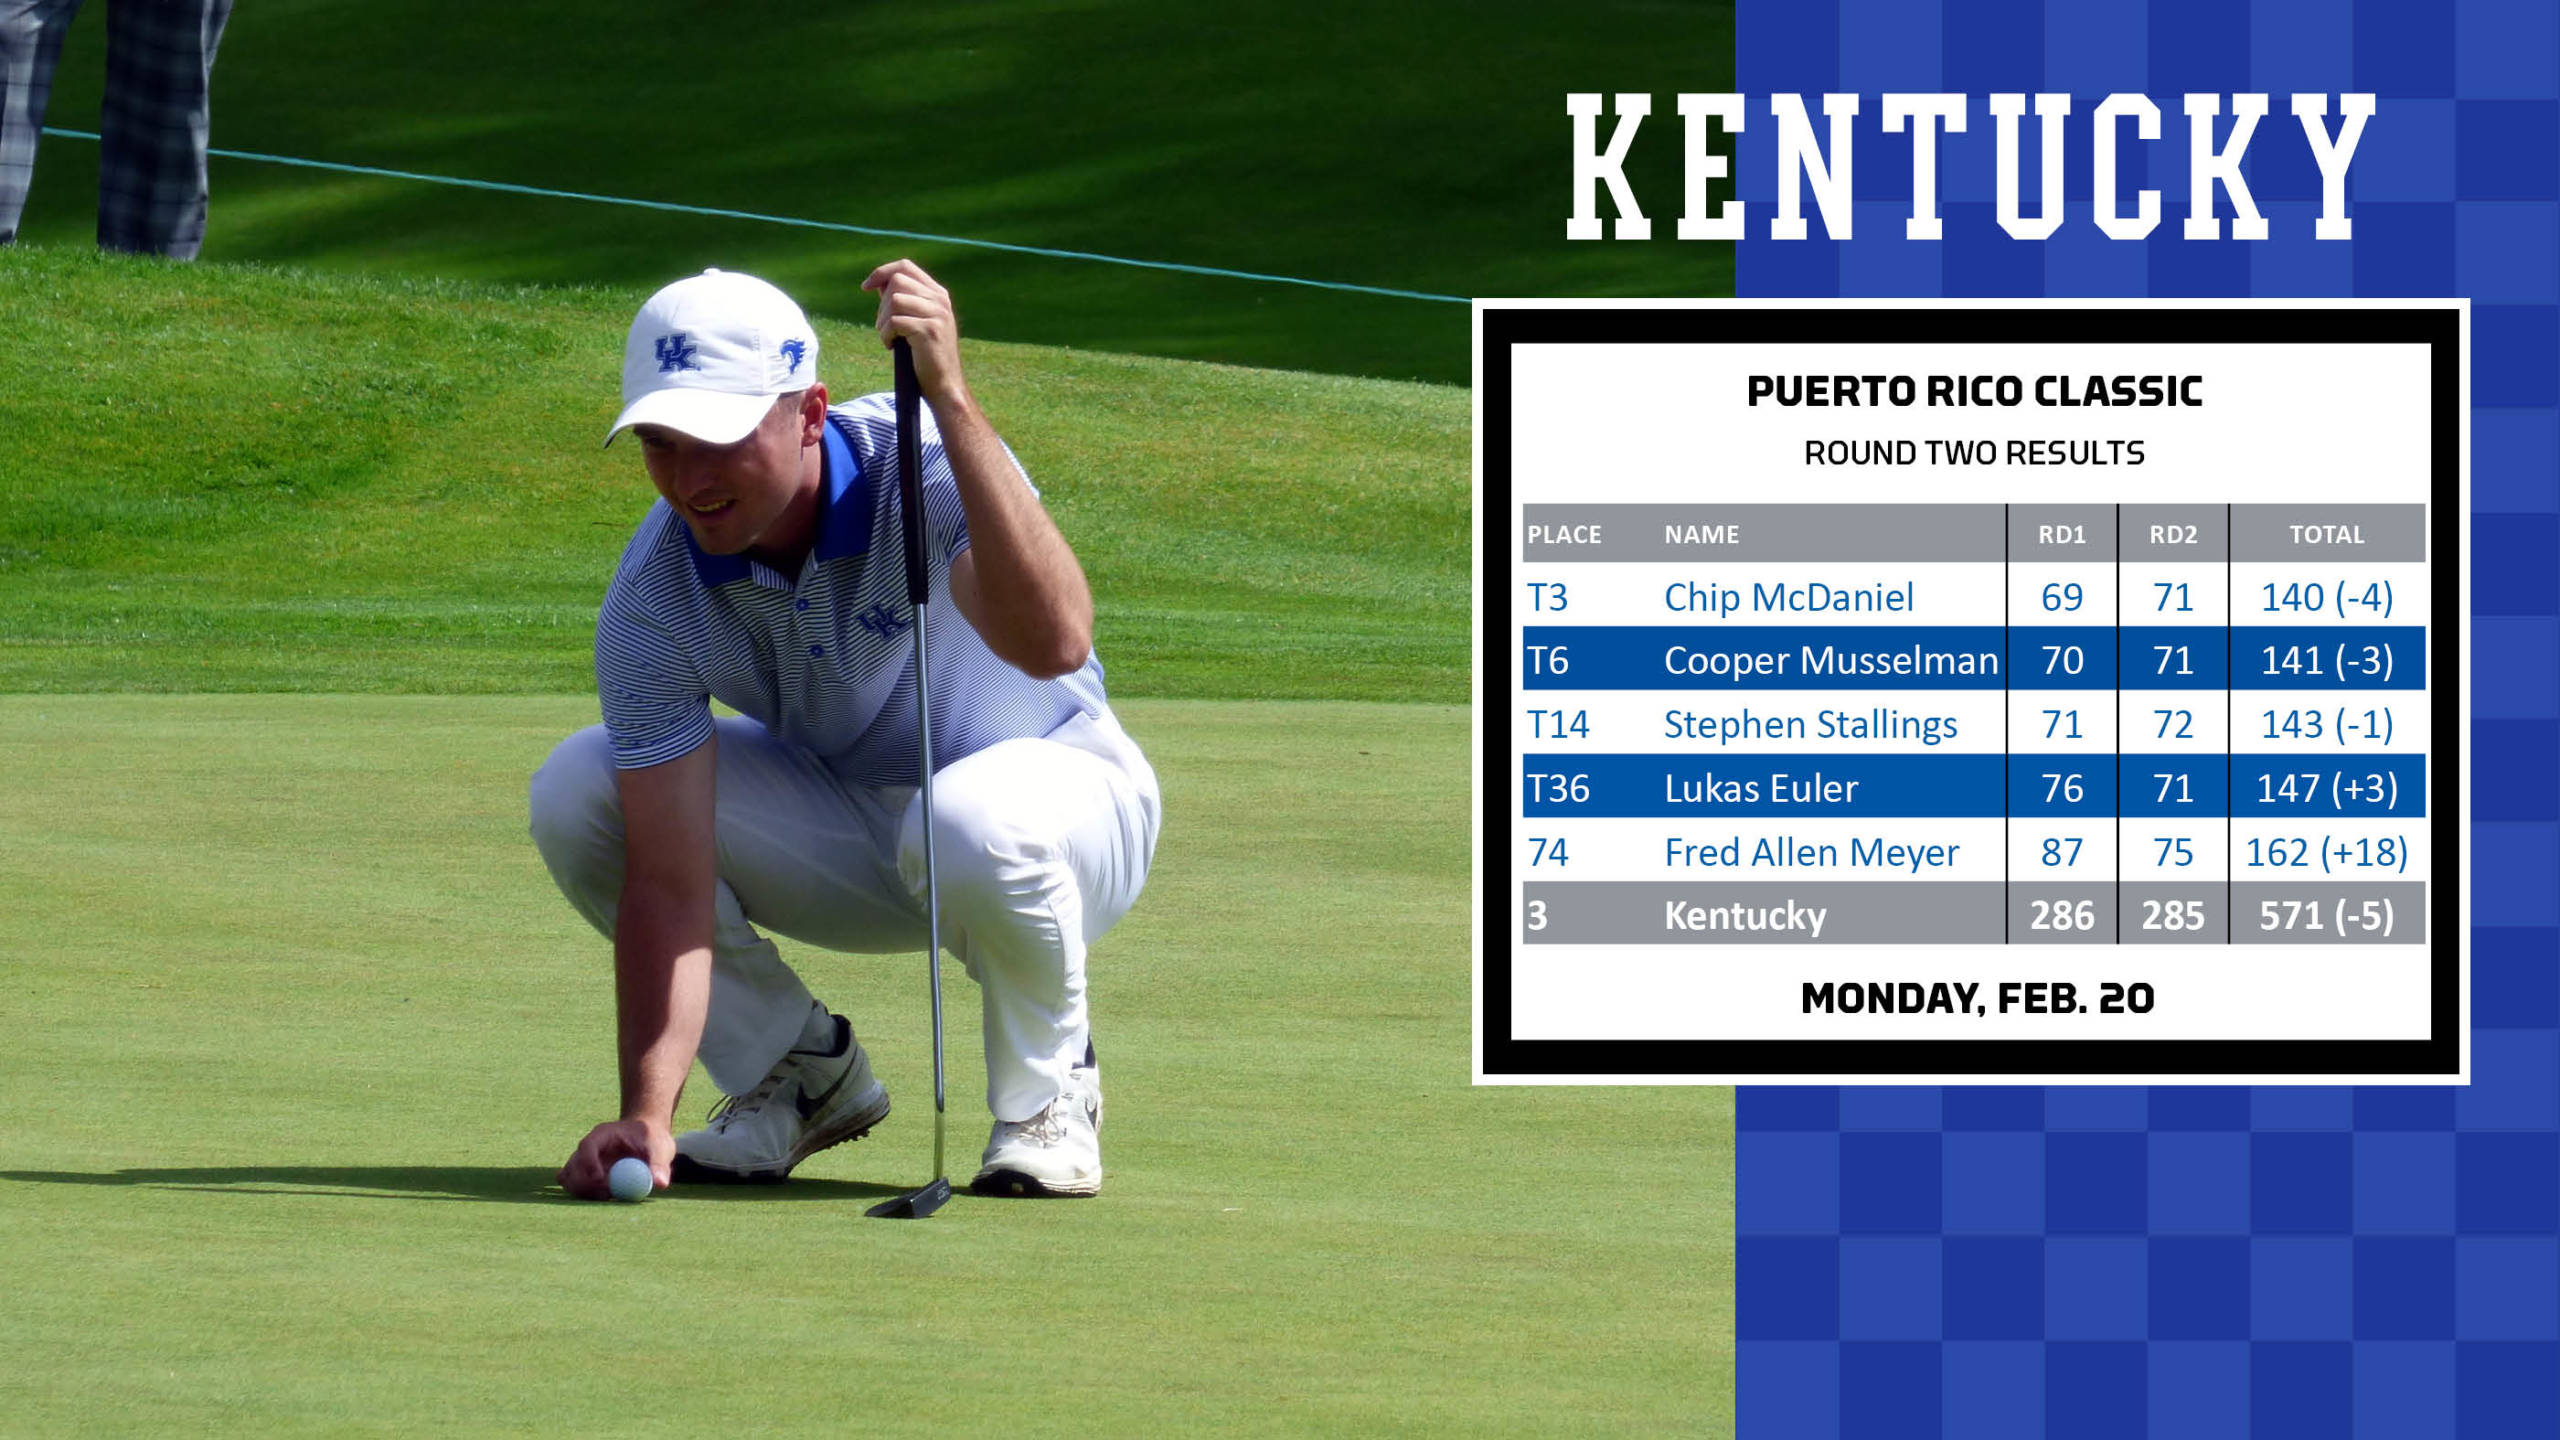 Kentucky Moves into Top Three at Puerto Rico Classic